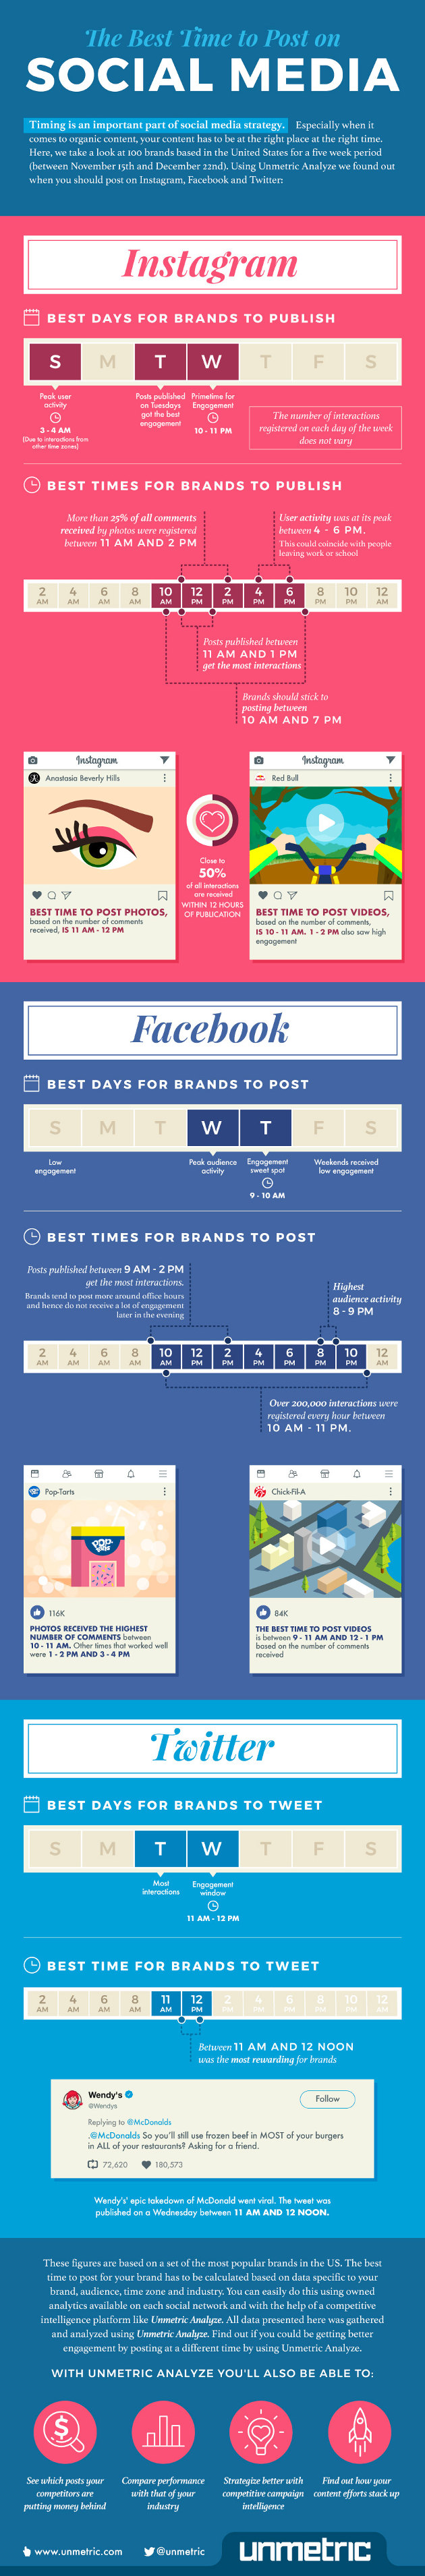 Best Days And Times To Post On Social Media